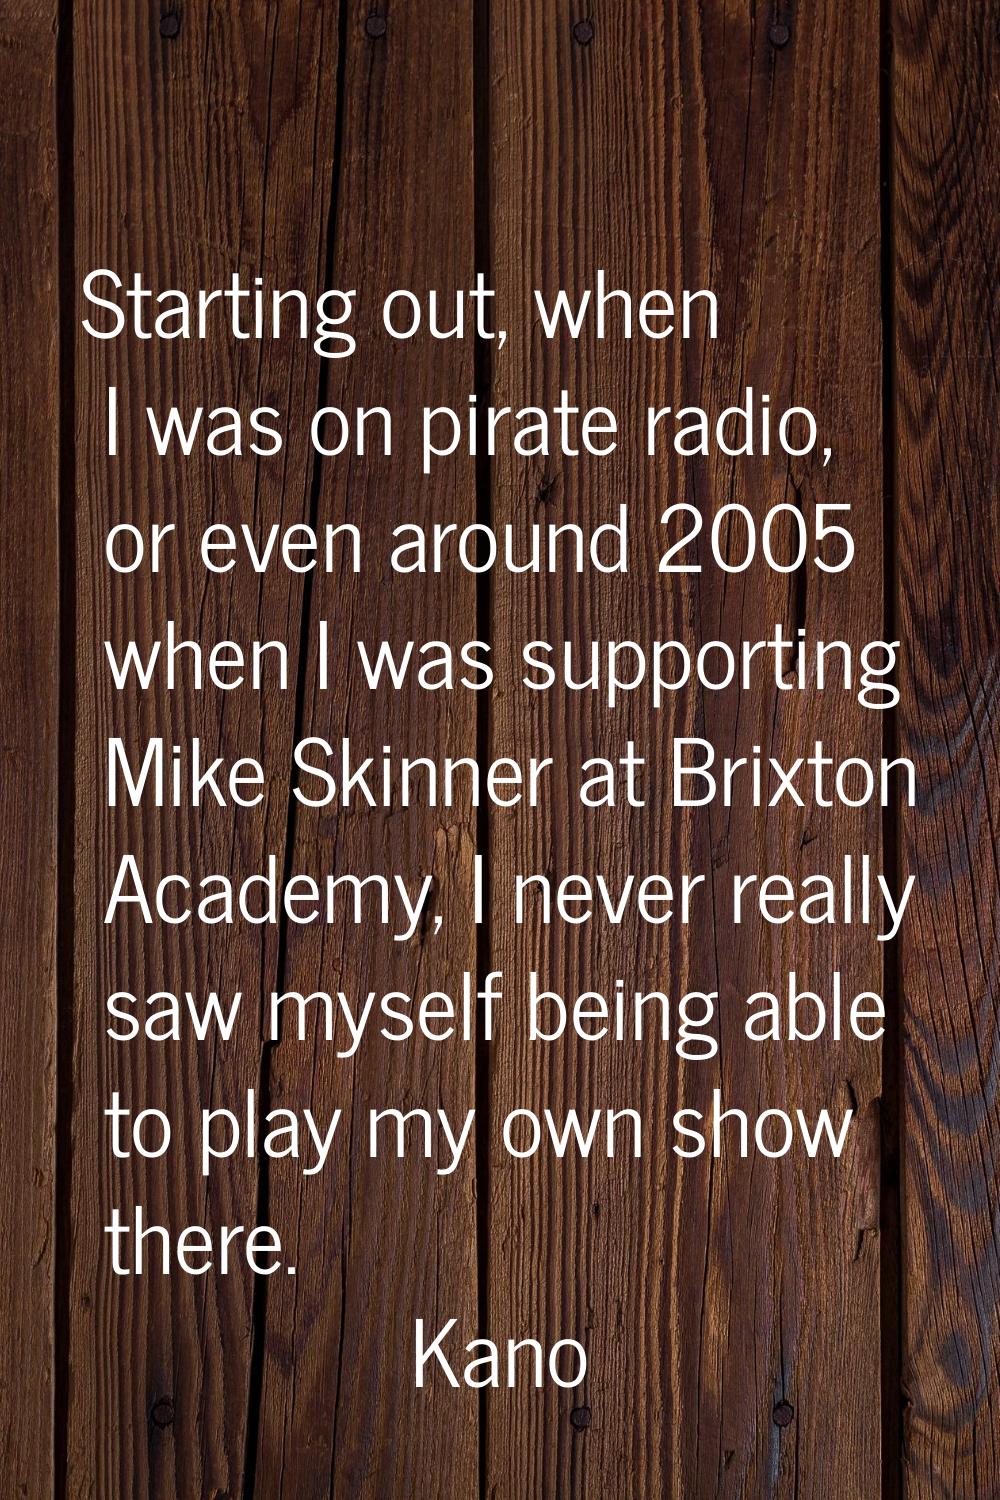 Starting out, when I was on pirate radio, or even around 2005 when I was supporting Mike Skinner at